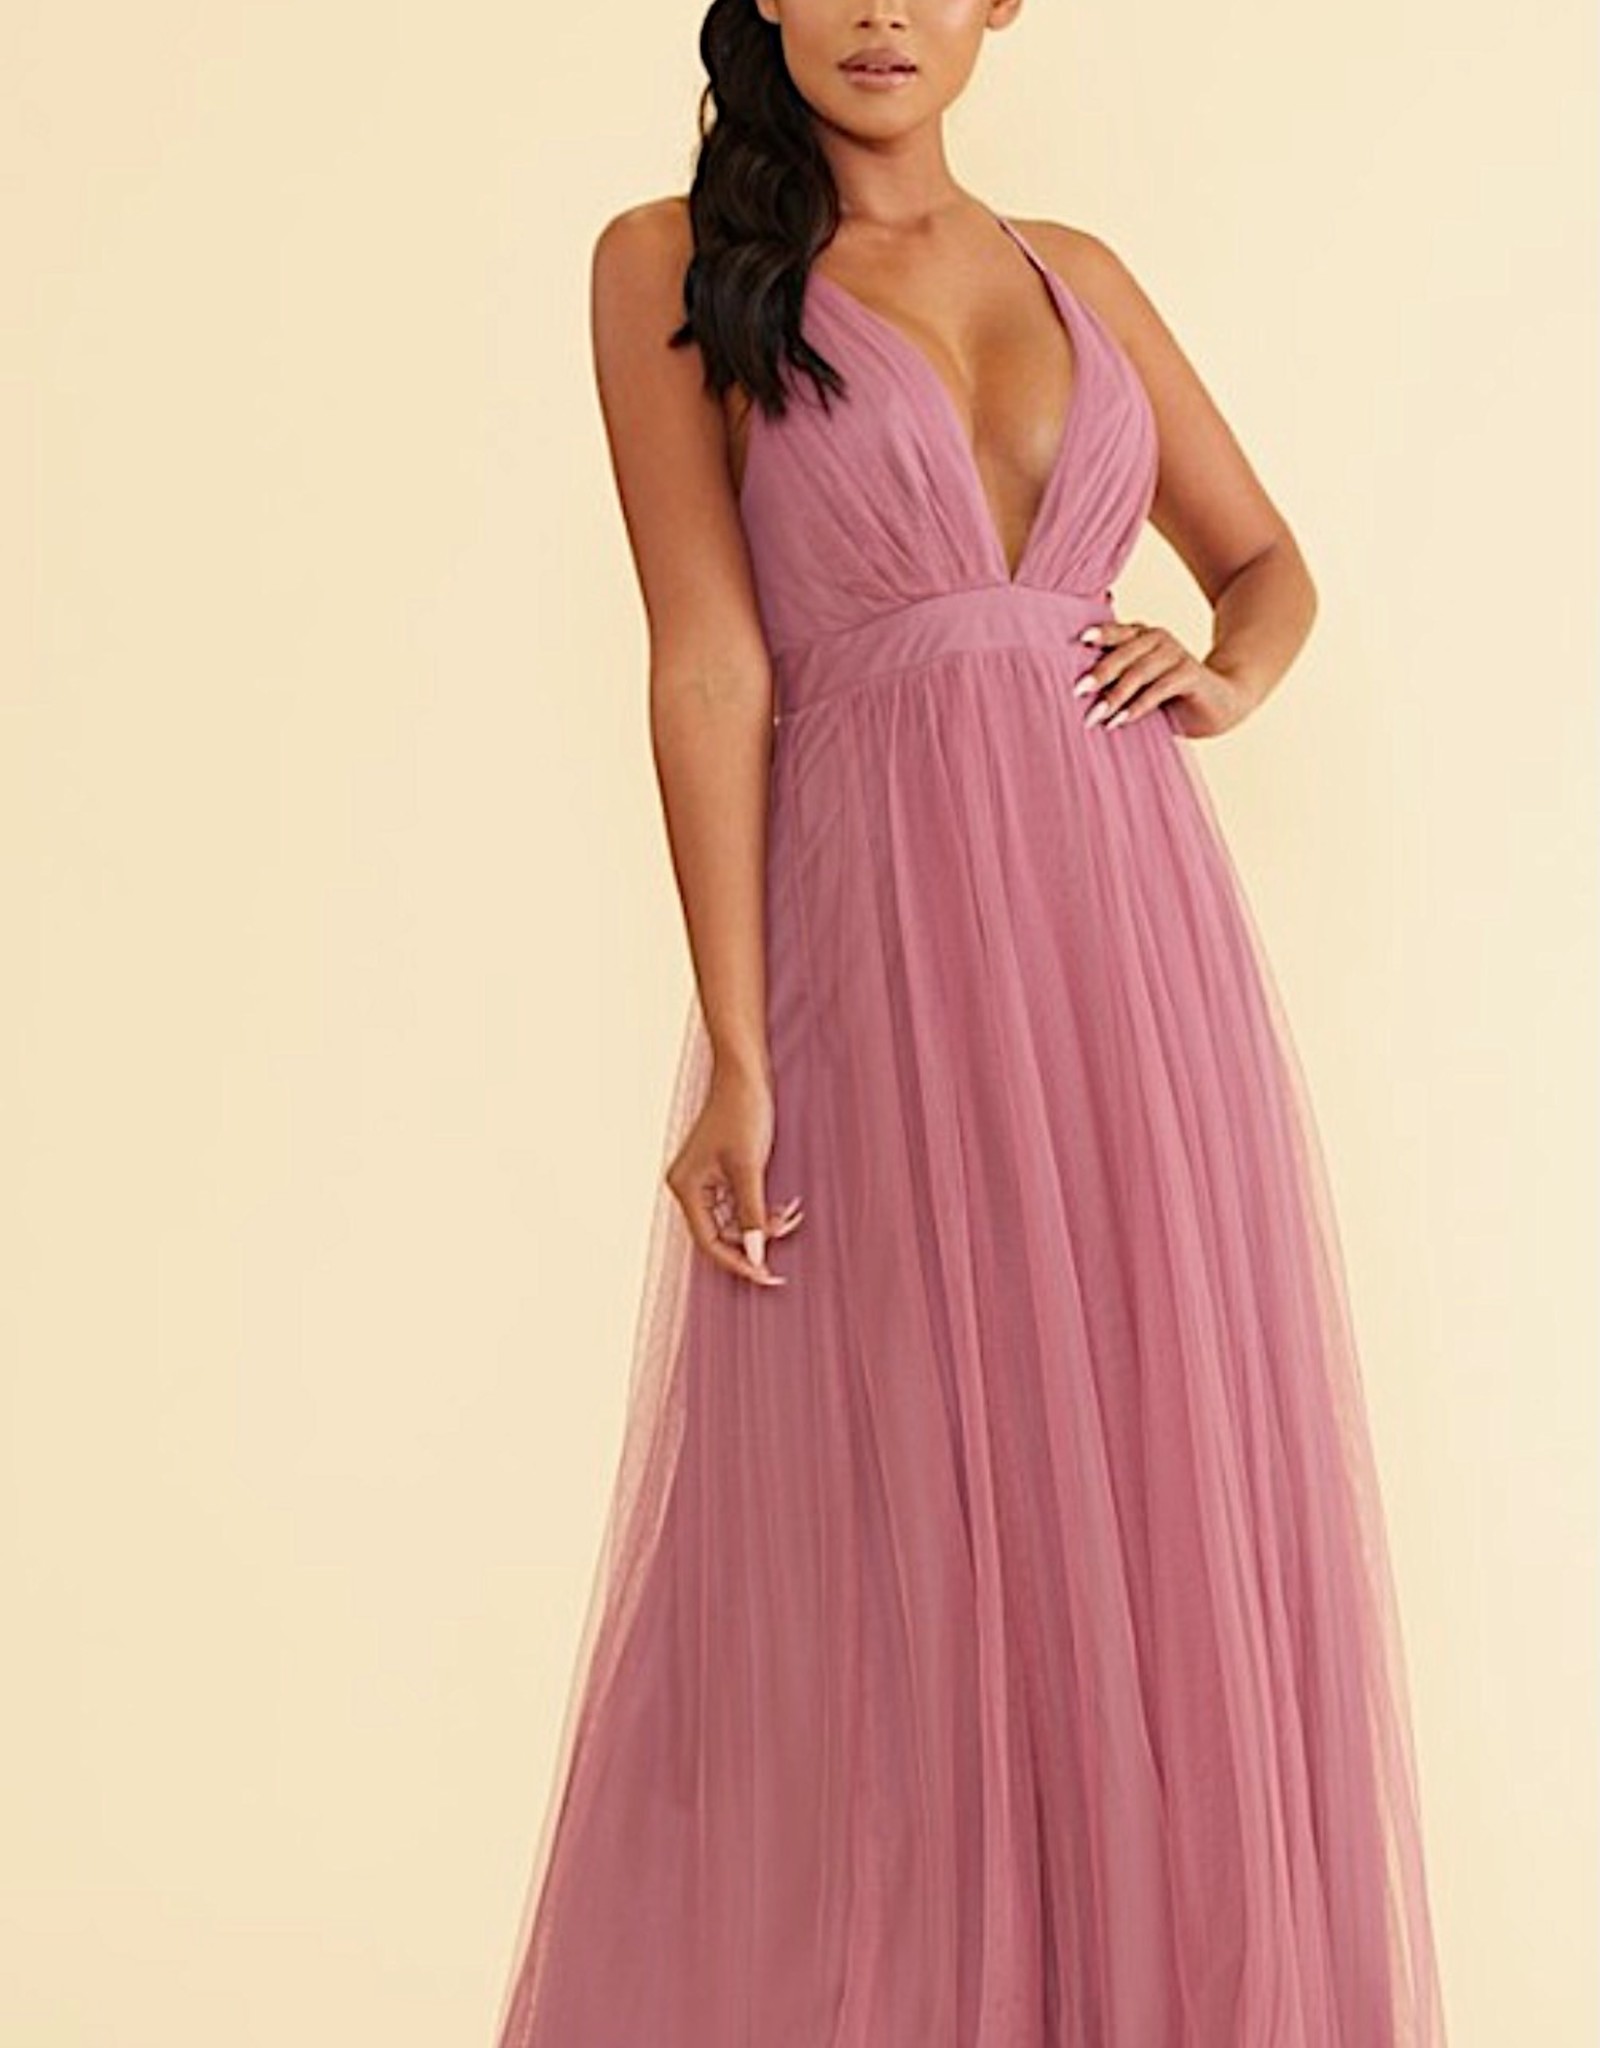 HUSH Solid tulle maxi dress